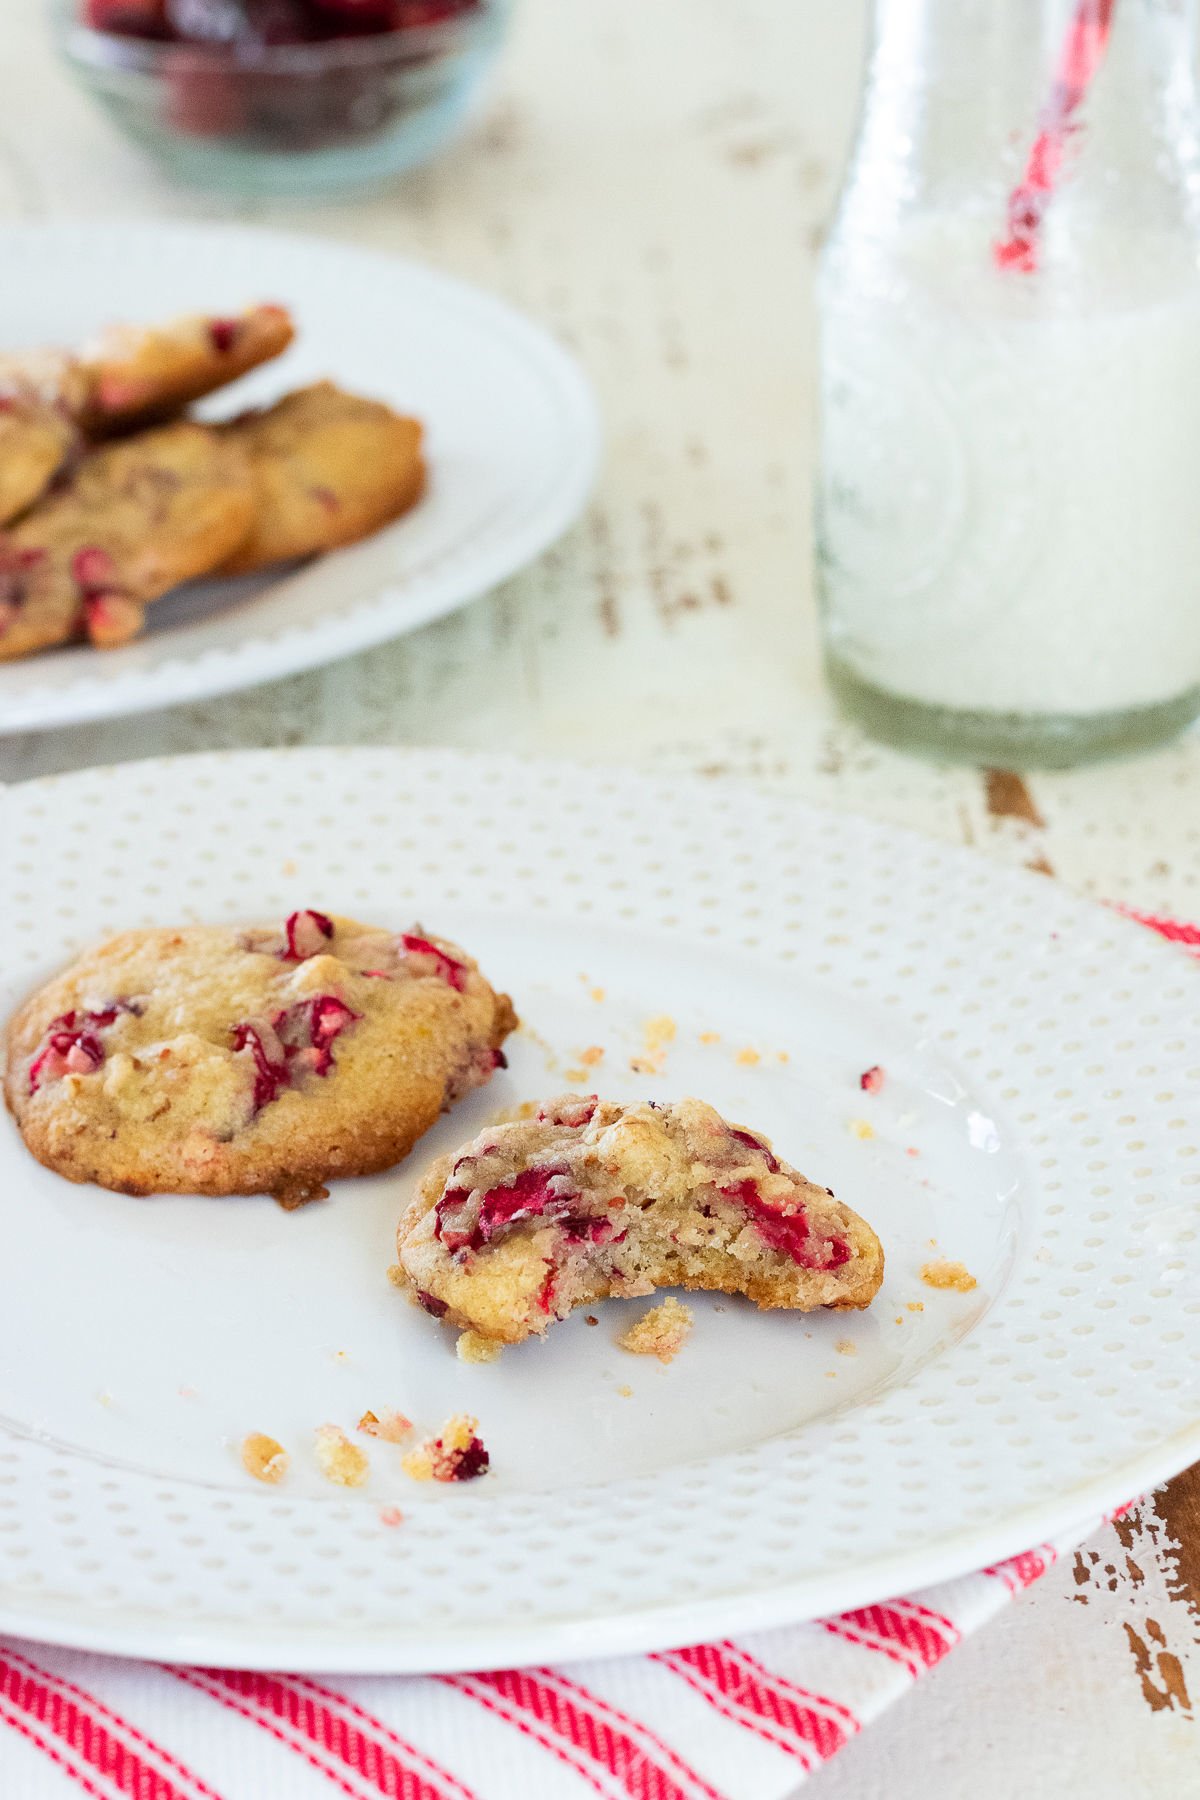 Cookies on a plate with a glass of milk to the side.